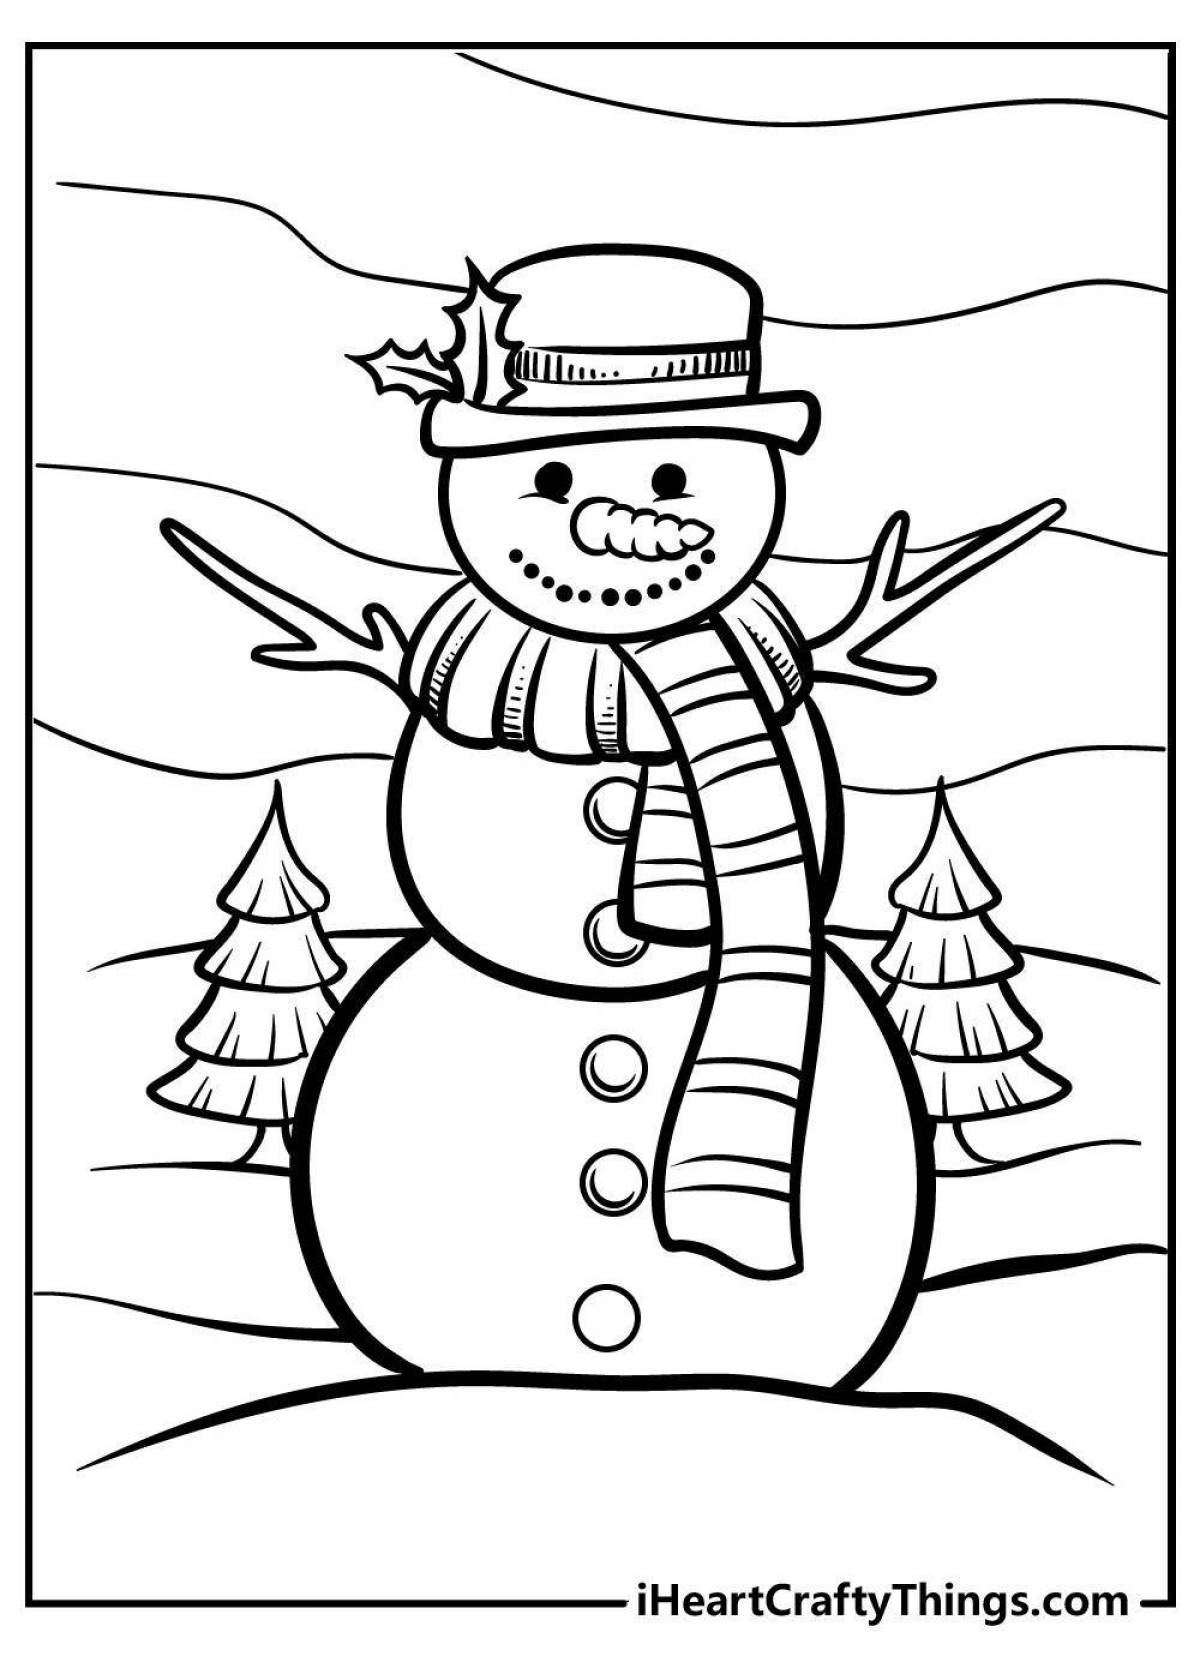 Color-frenzy coloring page snowman for kids 3 4